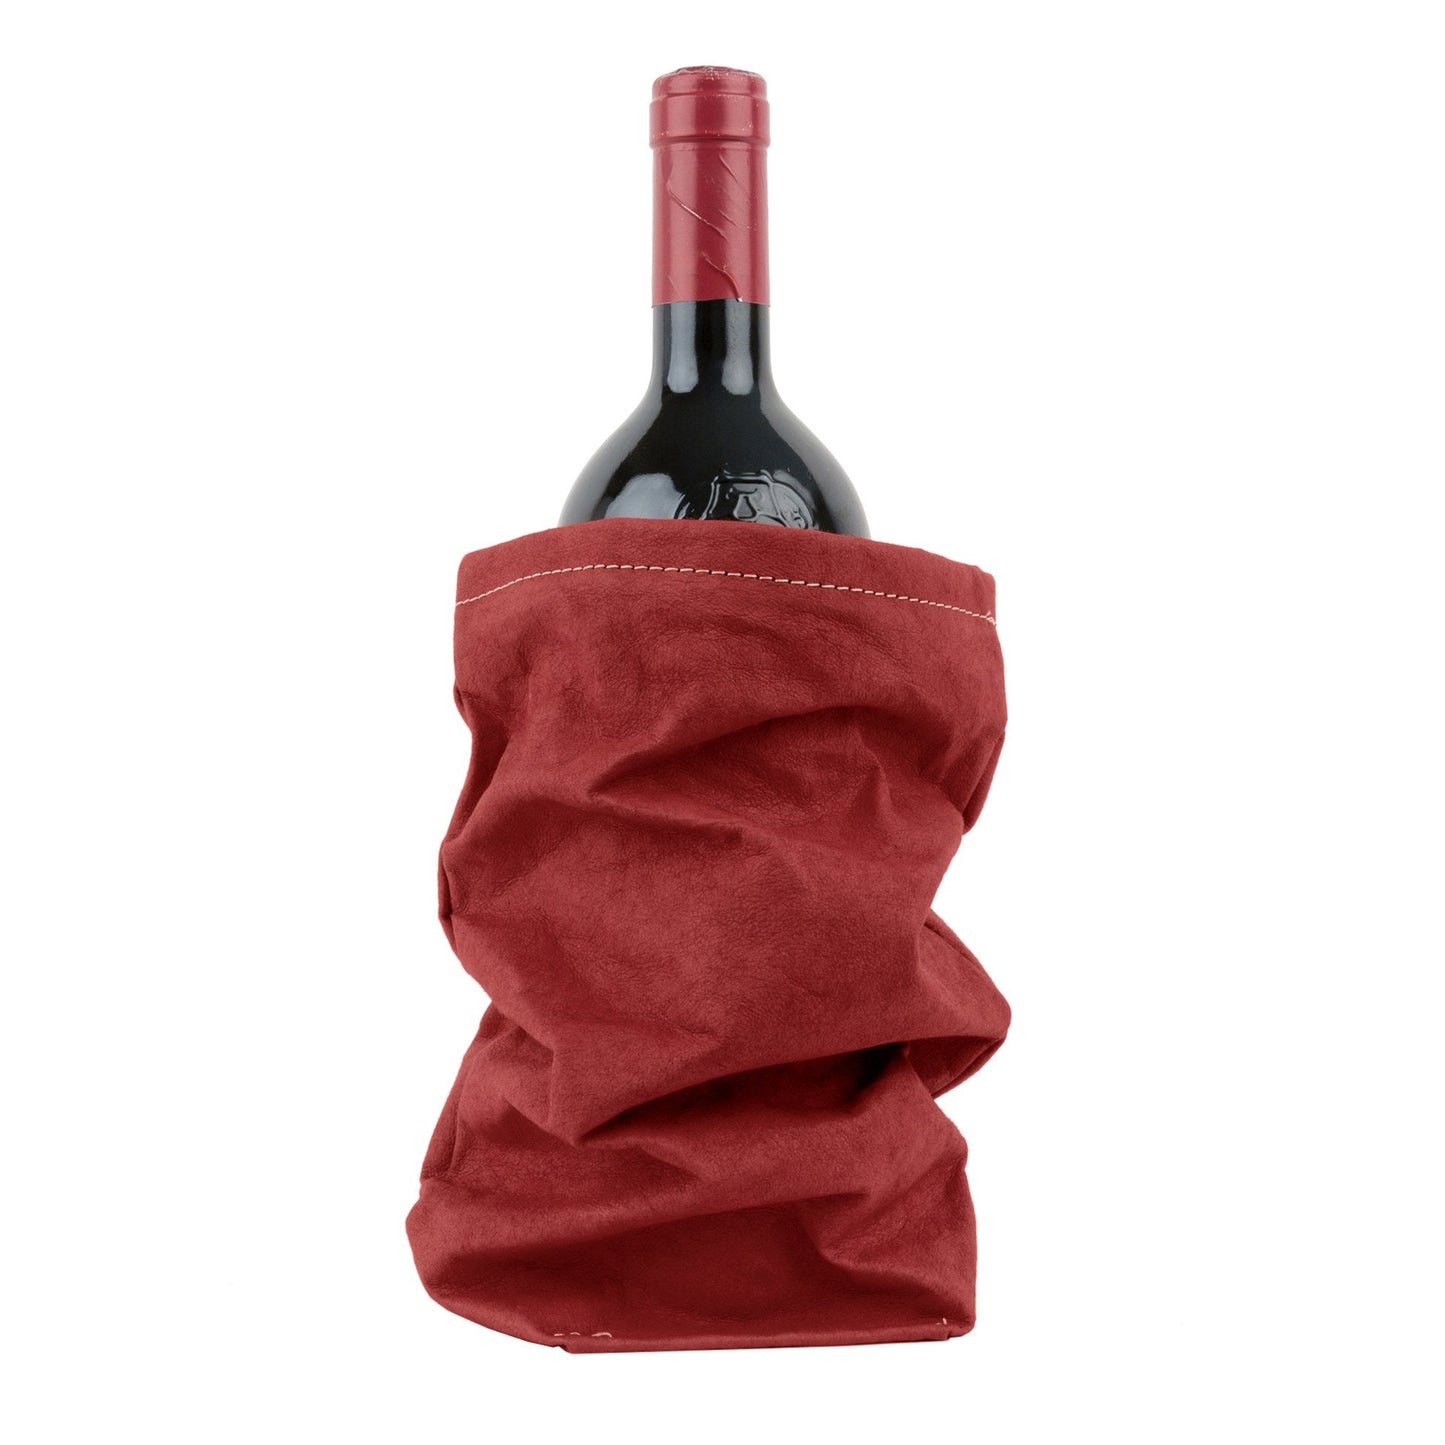 A bottle of red wine is shown inside a red washable paper wine holder.